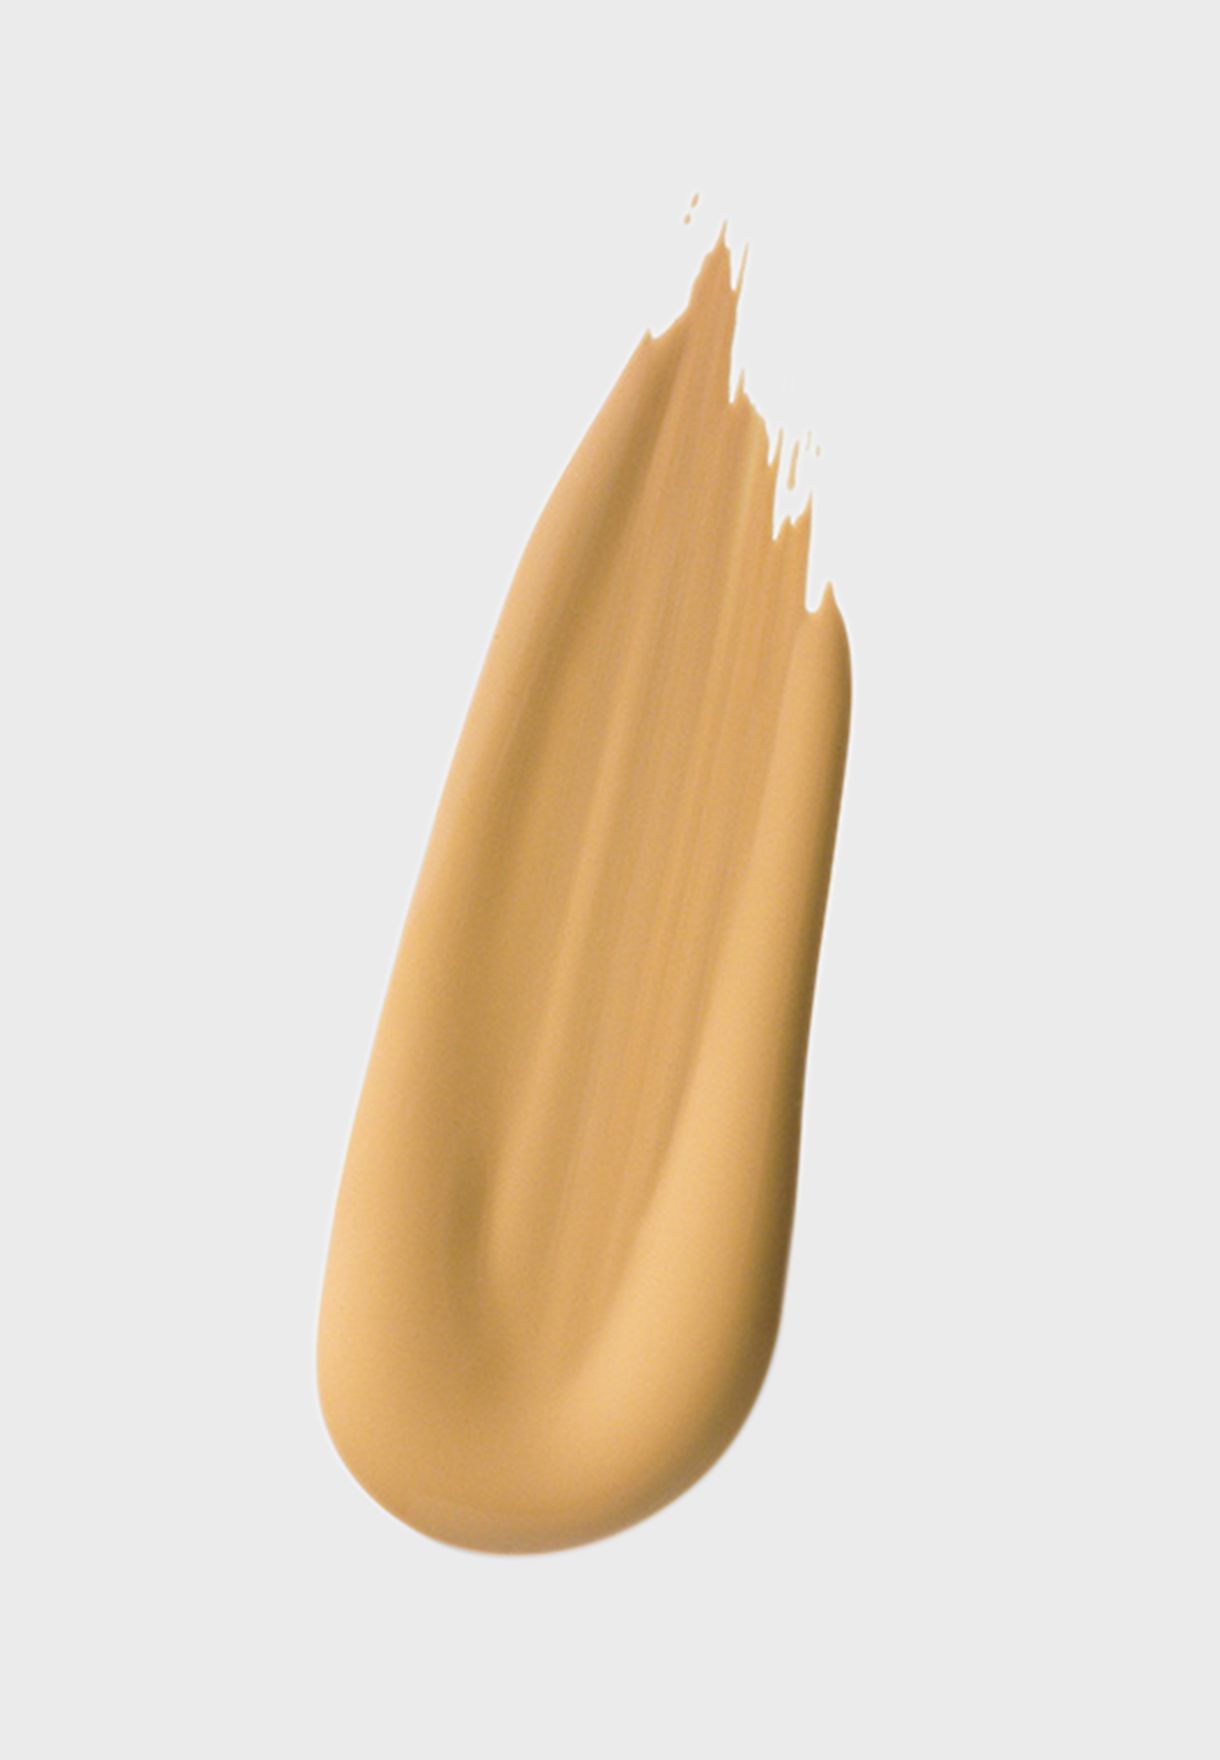 Double Wear Stay In Place Foundation-Natural Suede